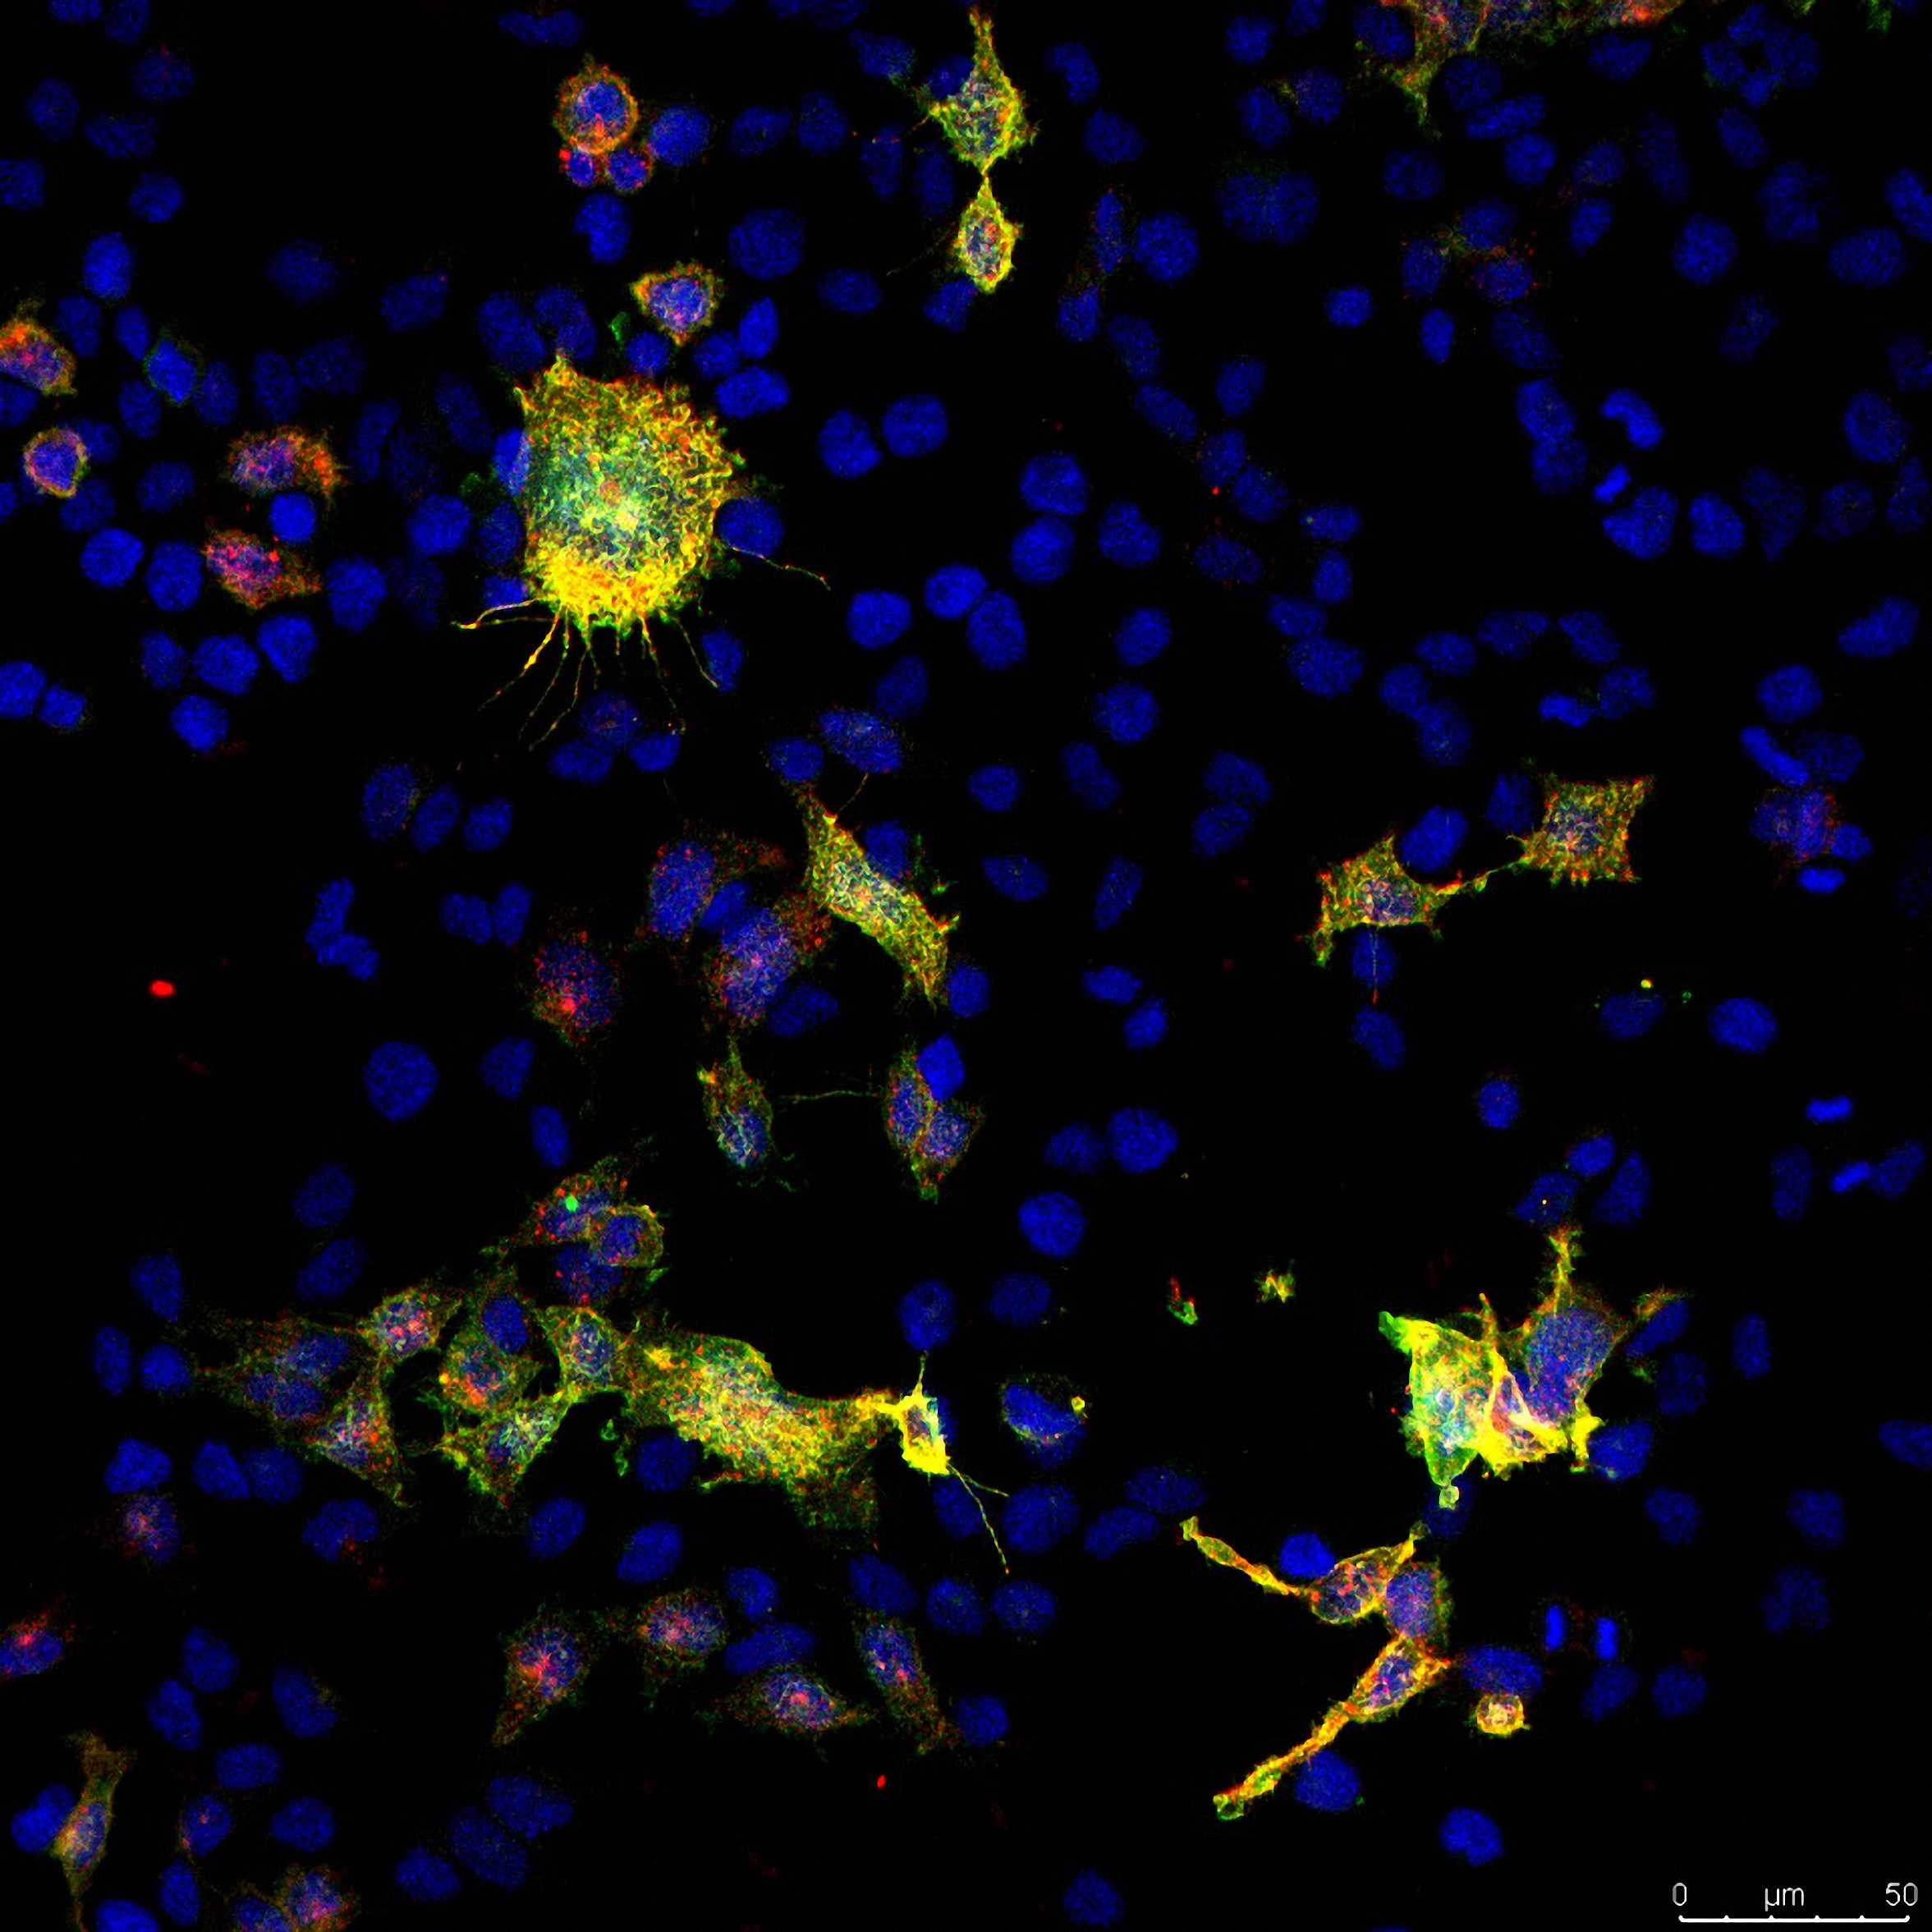 Confocal image from the project showing cultured cells with LCCR15 in yellow and green and the SARS-Cov-2 spike protein in red. Taken by Dr Cesar Moreno at the University of Sydney facility.